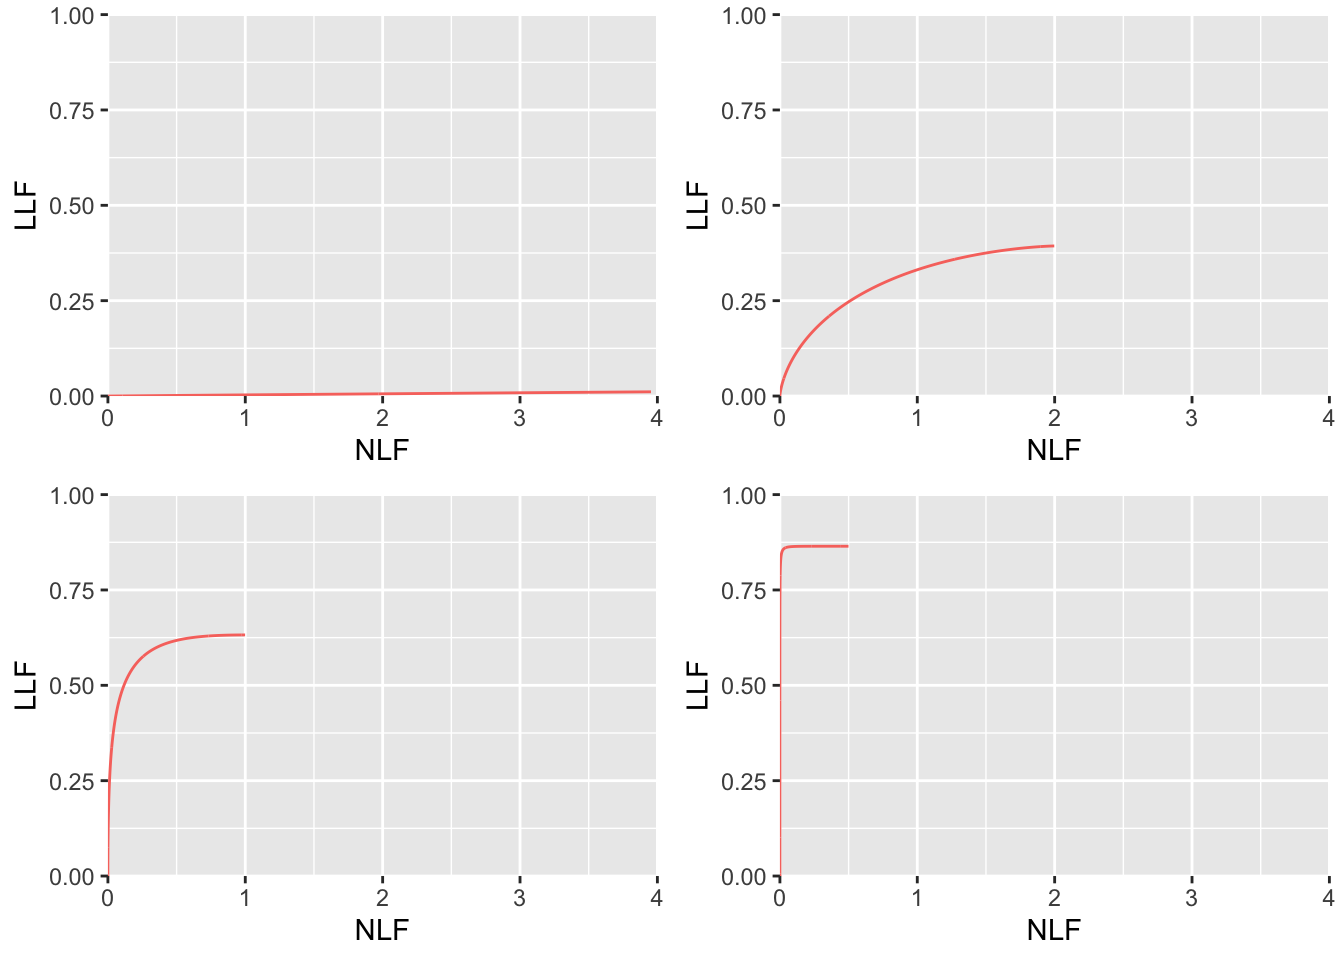 RSM-predicted FROC curves using intrinsic parameters $\lambda_i = 2$ and $\nu_i = 0.5$. Top left: $\mu = 0.1$; Top right: $\mu = 1$; Bottom left: $\mu = 2$; Bottom right: $\mu = 4$. Some plots are **not** contained within the unit square which makes it impossible to use the FROC-AUC as a figure of merit.